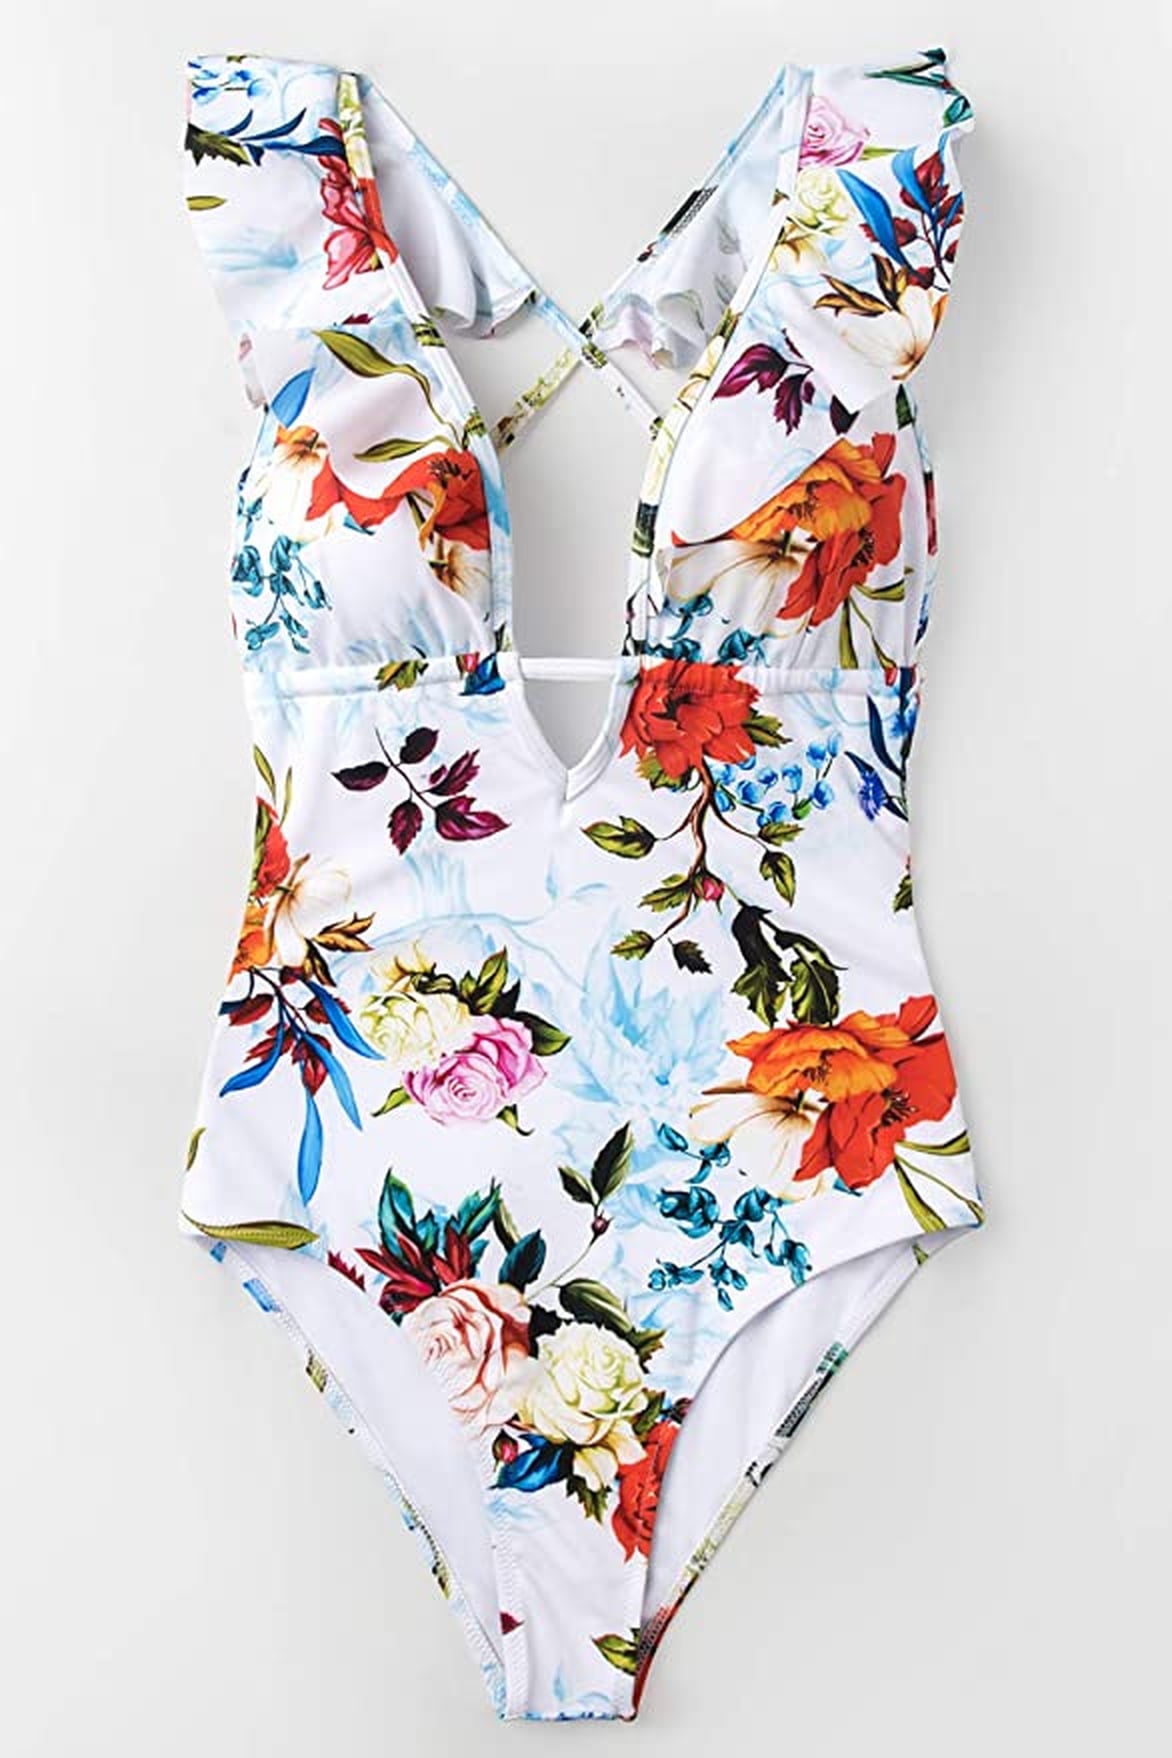 Top Swimsuits From Amazon's Most-Loved Section | 2021 | POPSUGAR Fashion